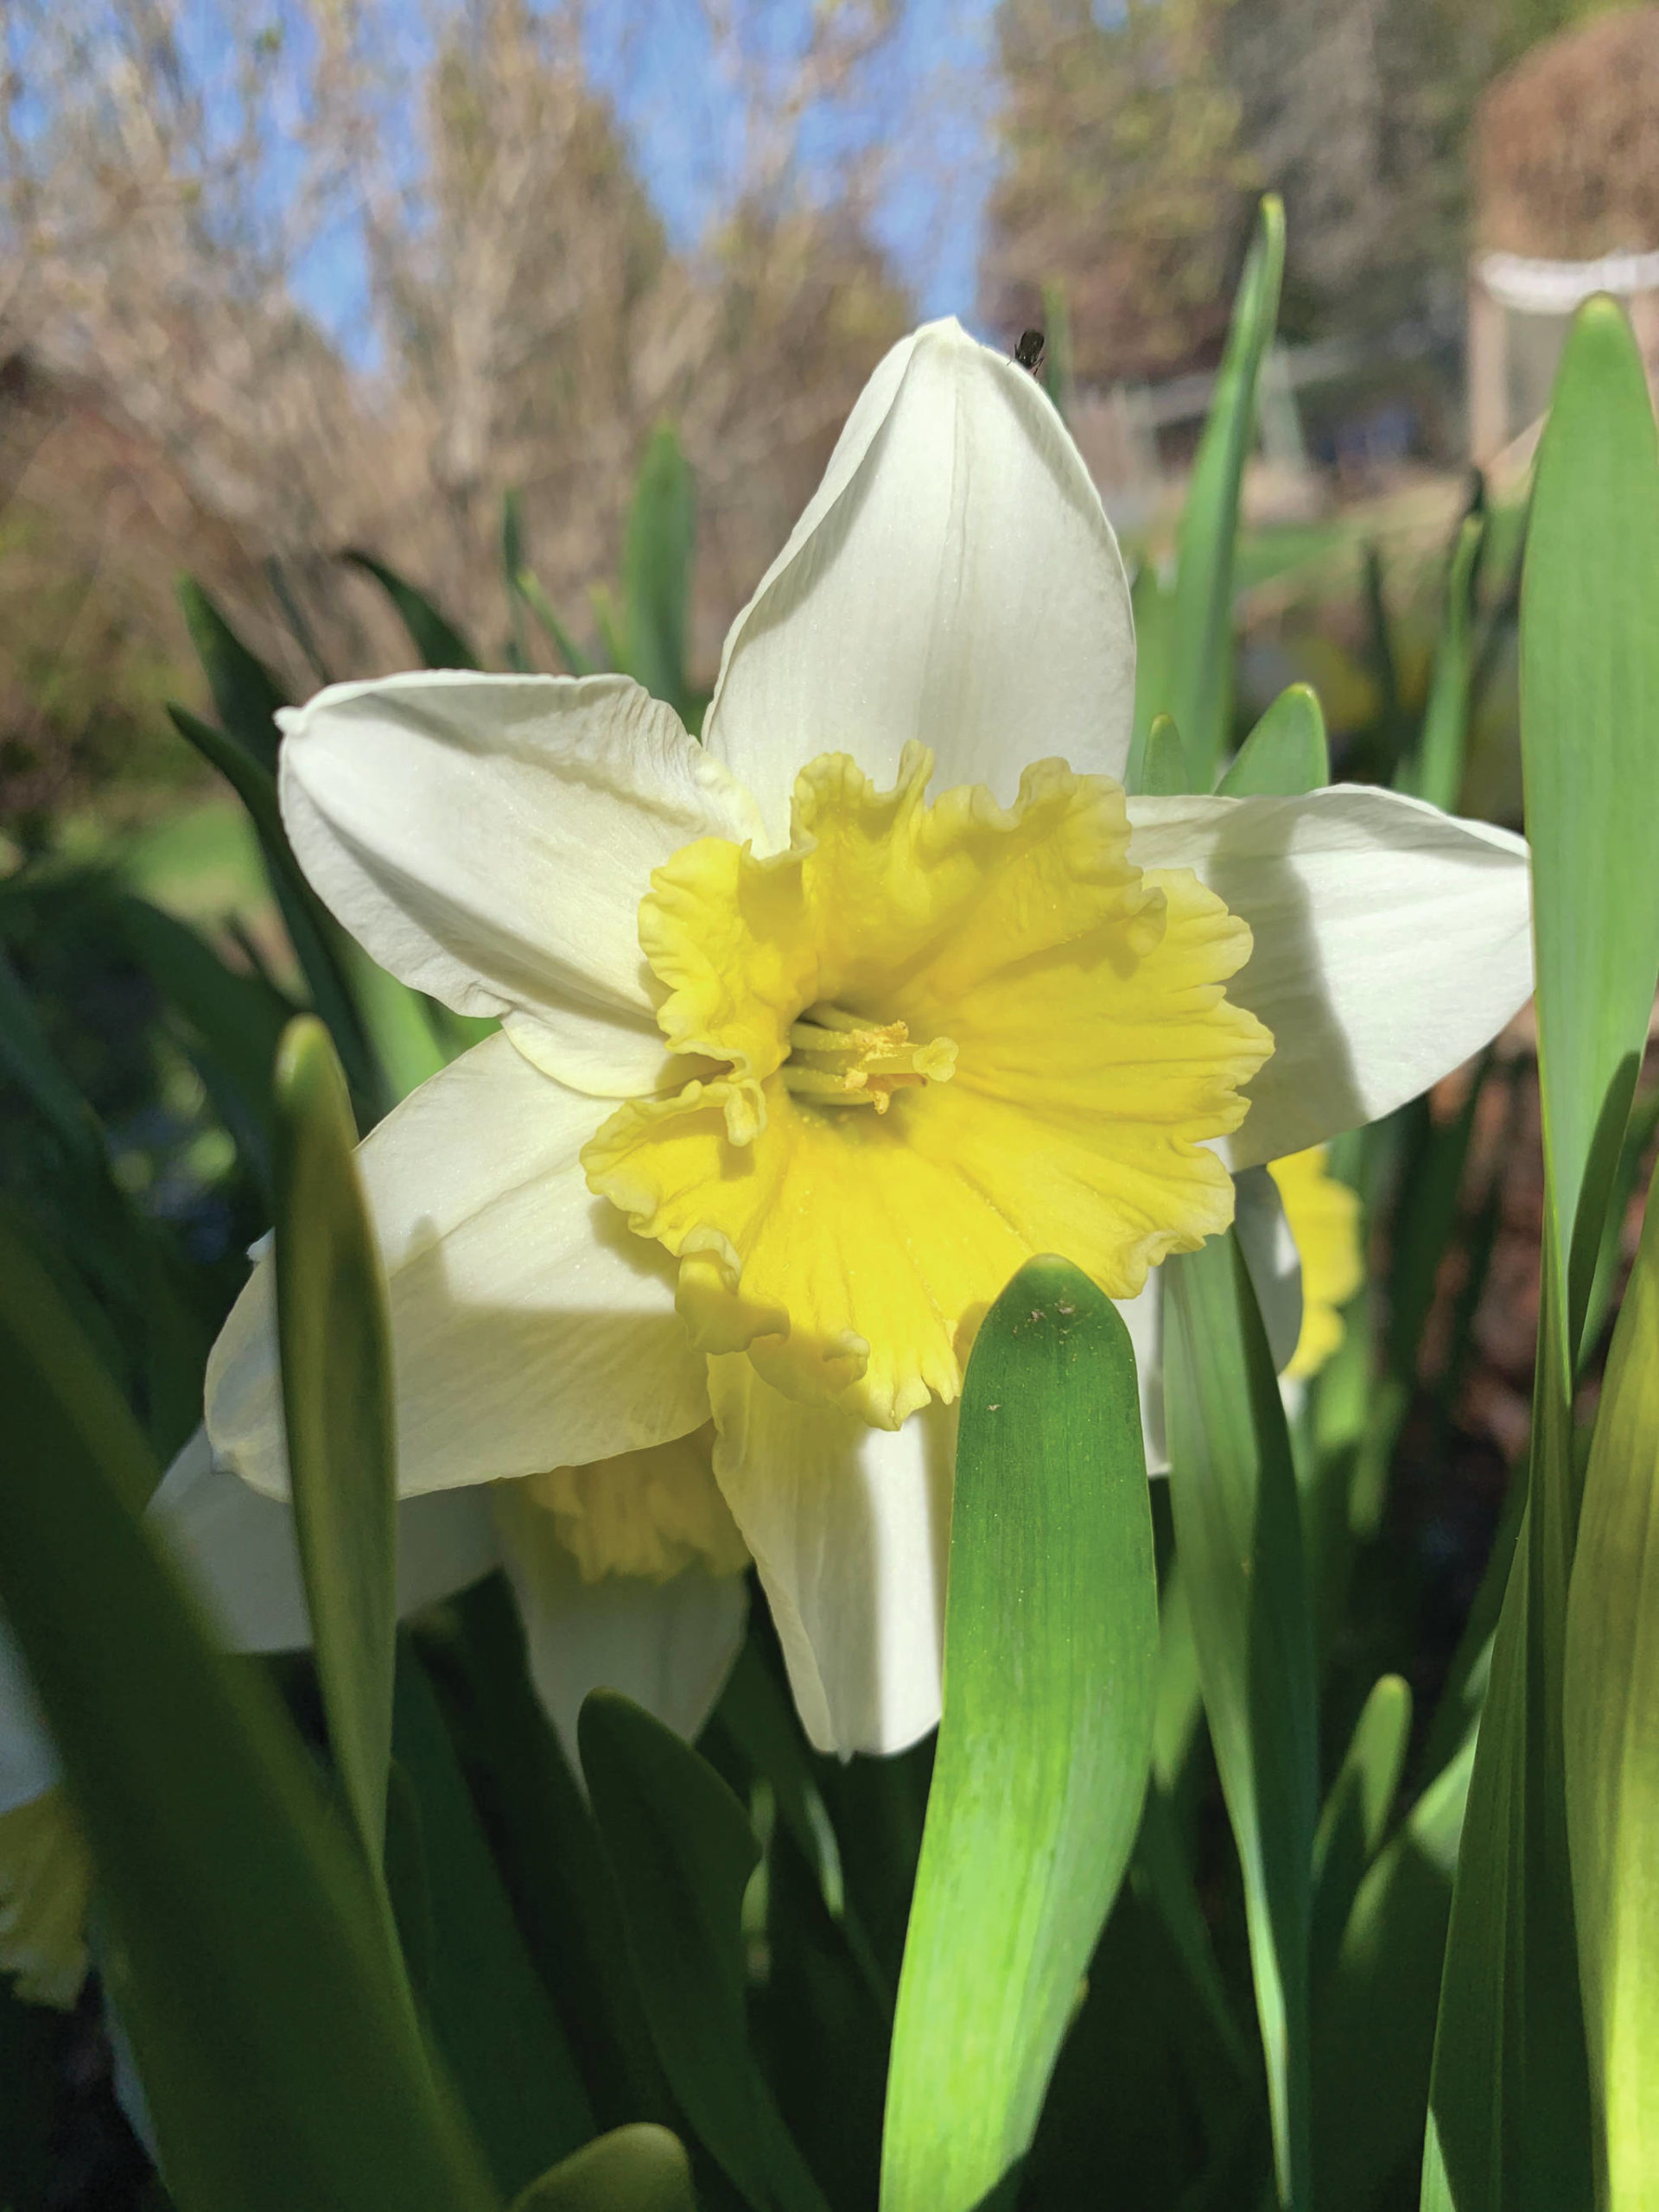 Daffodils add a splash of color and cheer, as seen here on Sunday, May 23, 2021, in the Kachemak Gardener’s garden in Homer, Alaska. (Photo by Rosemary Fitzpatrick)